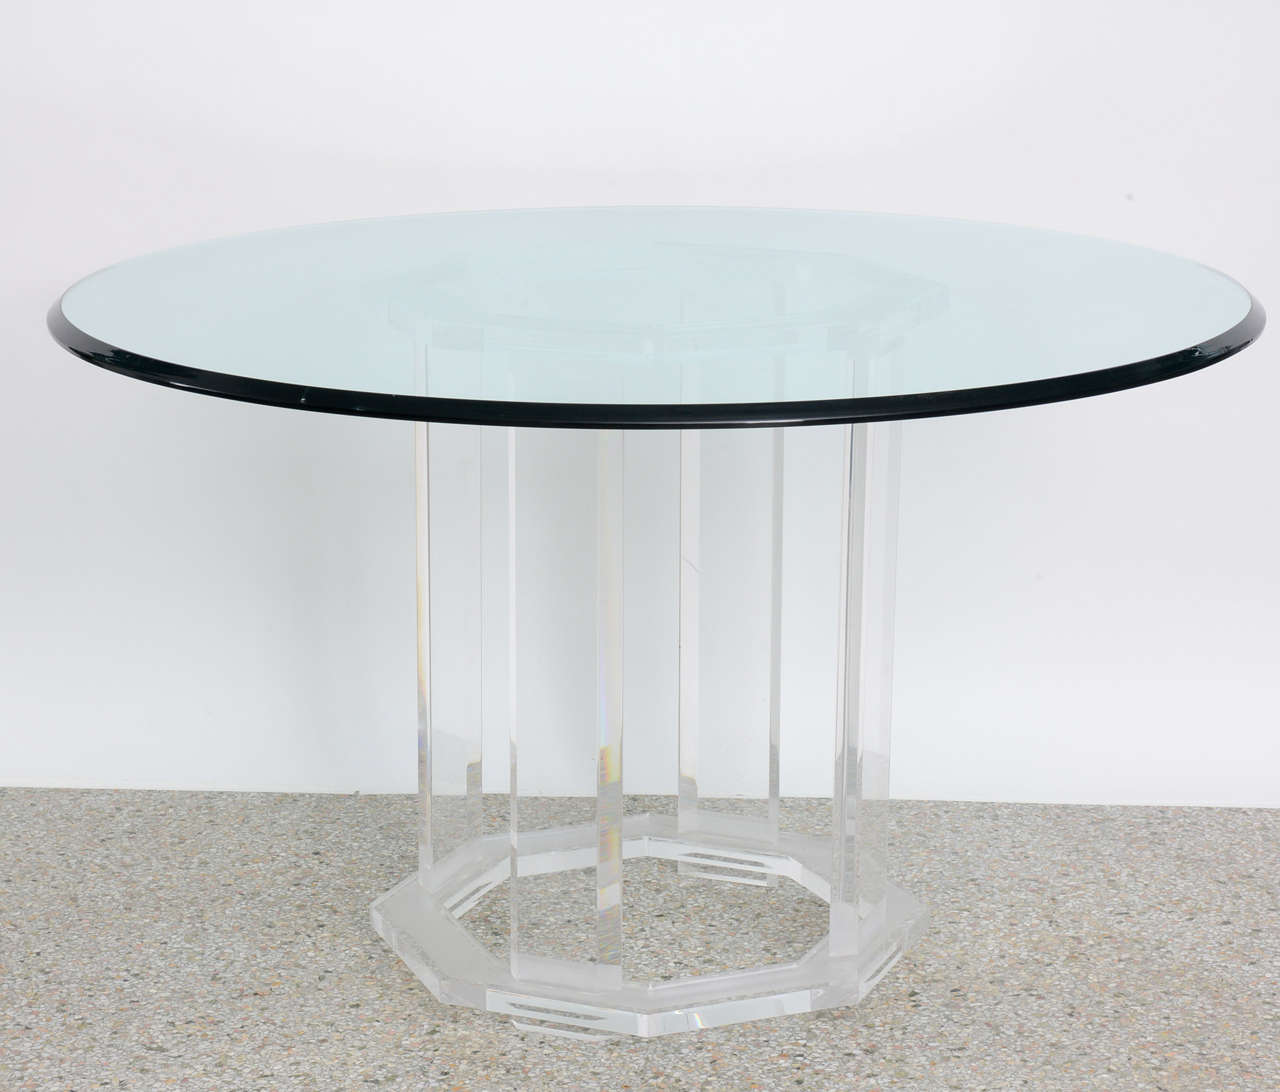 Entry or dining table featuring a round beveled glass top on a 1970's lucite base.  The top and bottom bands of lucite are frosted and the center is clear. Base alone measures 28